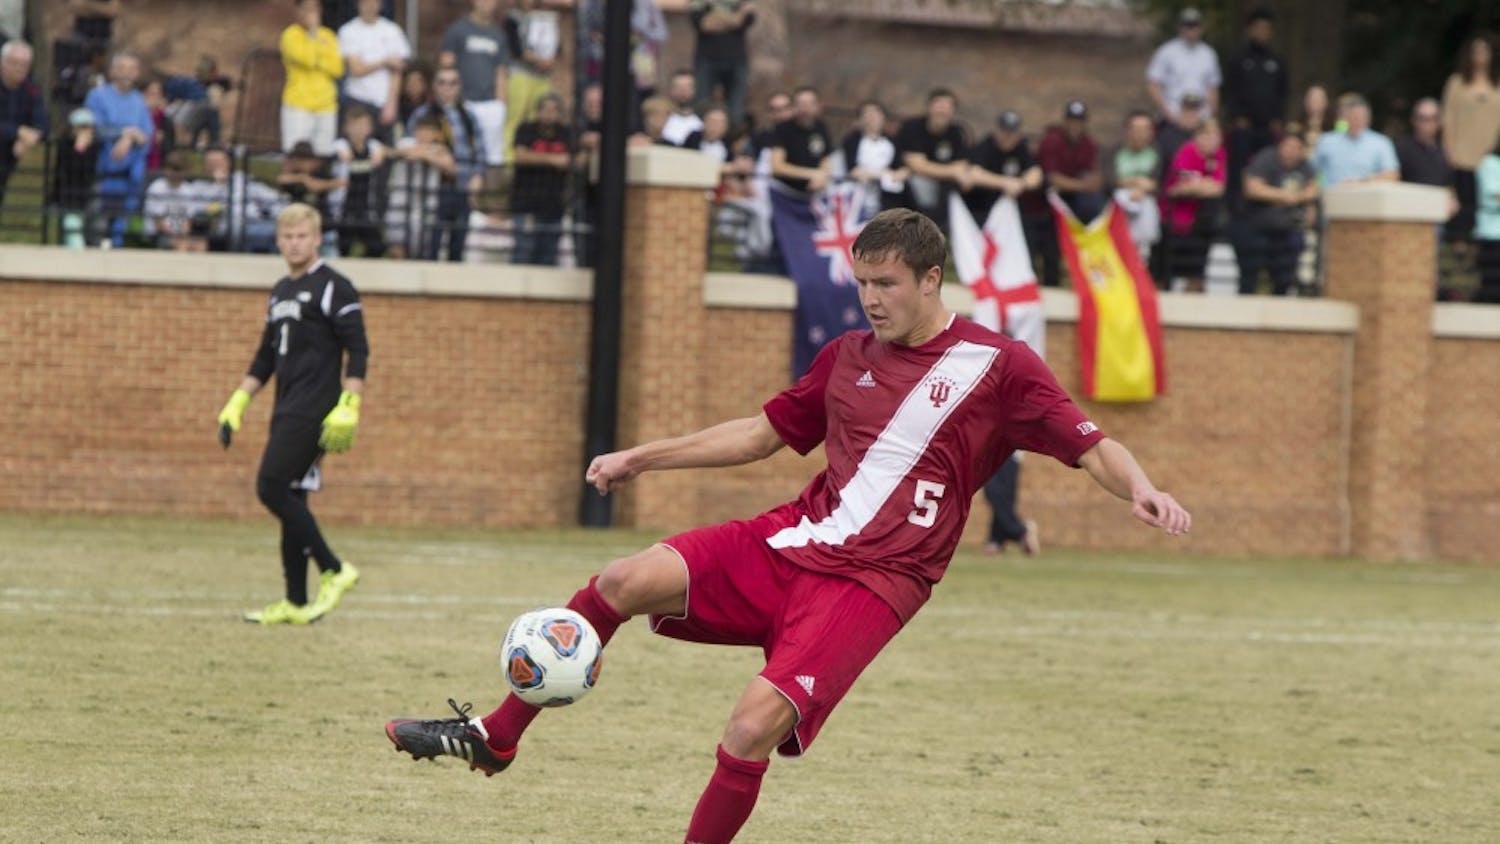 Sophomore defender Grant Lillard gets control of the ball during the first half of play against Wake Forest on Nov. 29, 2015 at W. Dennie Spry Stadium.